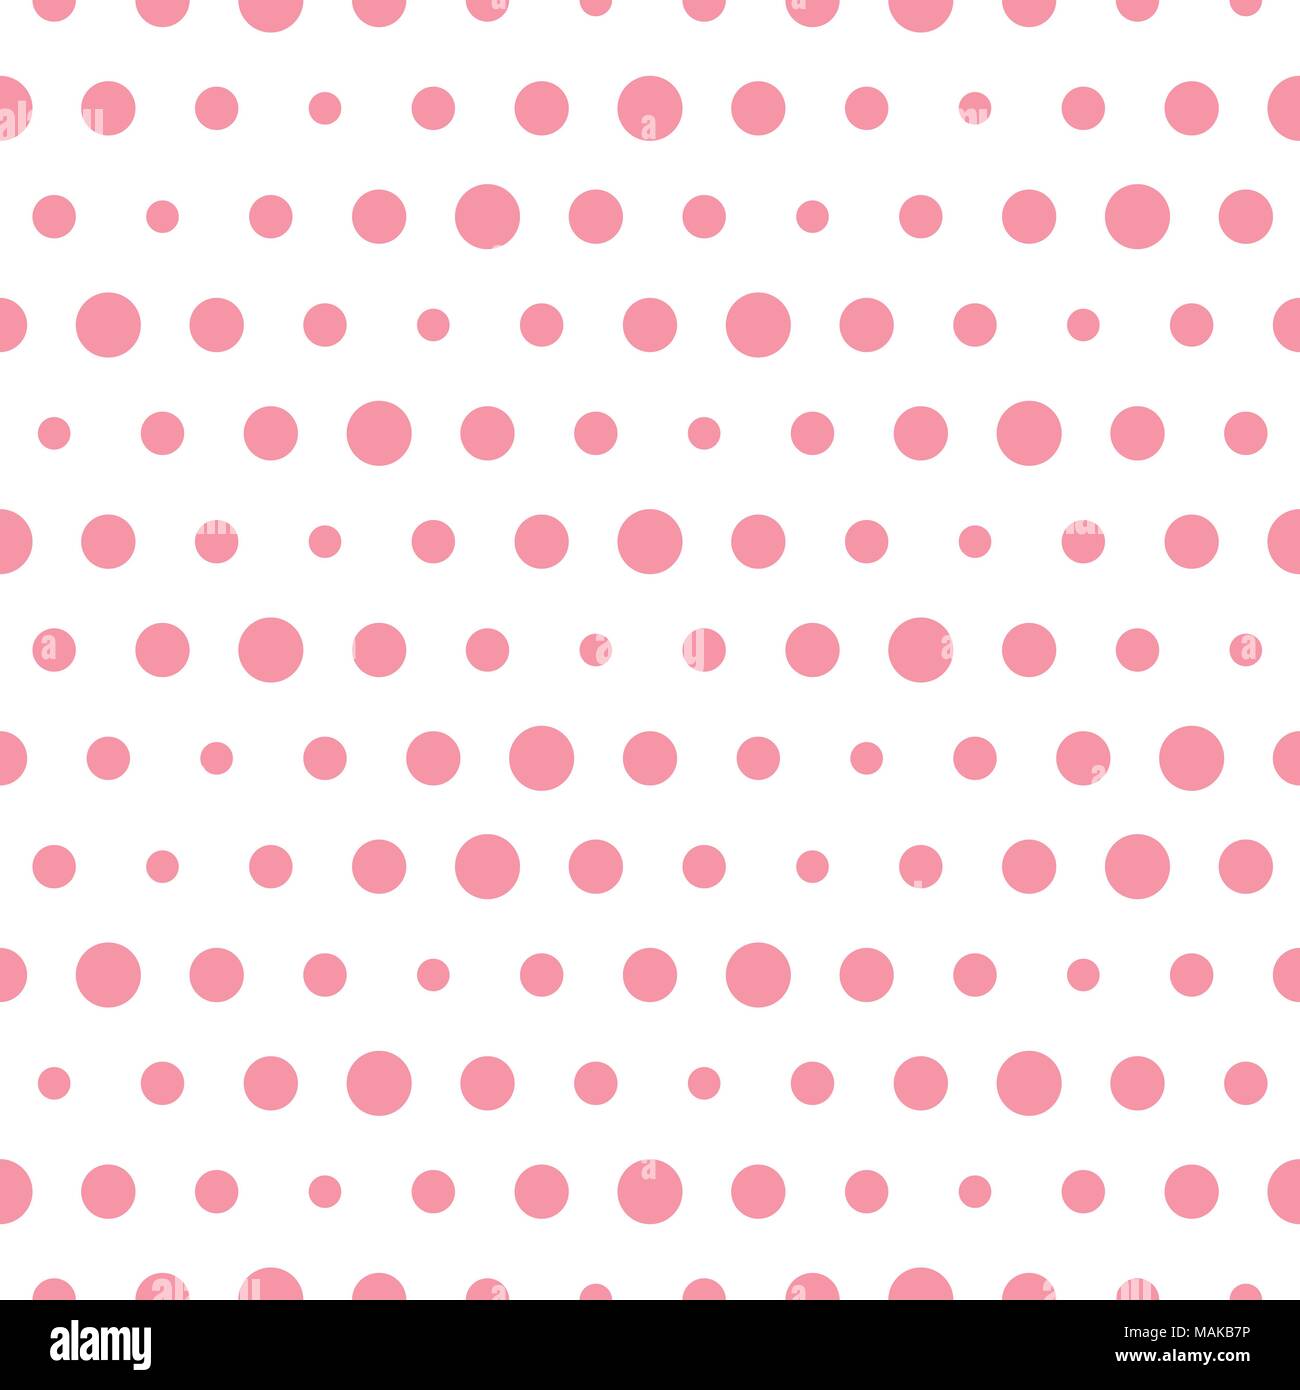 Vector pink polka dot seamless pattern. Circles of different sizes on ...